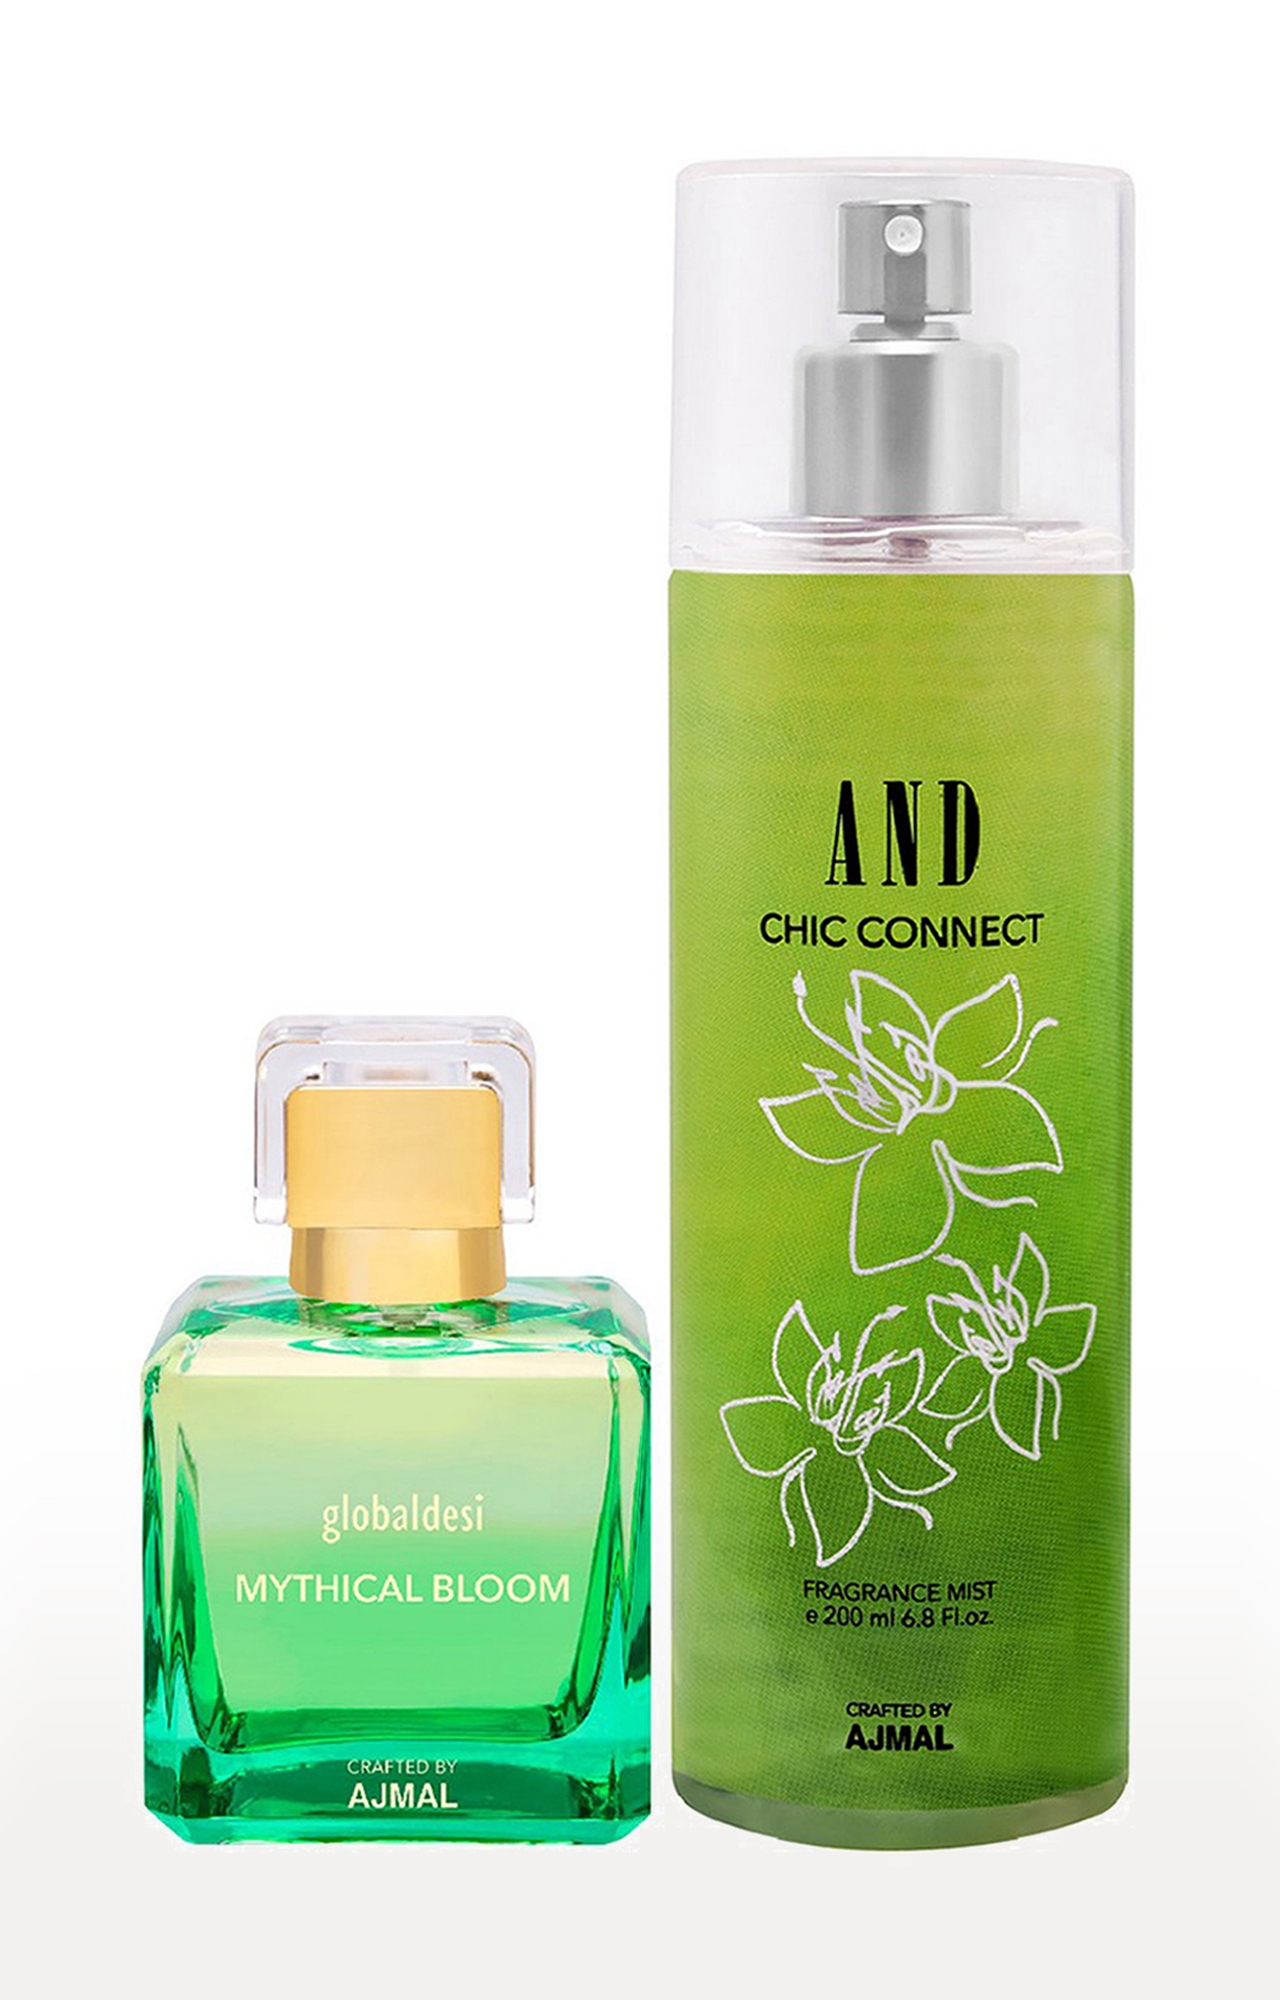 AND Crafted By Ajmal | Global Mythical Bloom Trance EDP 50ML & AND Chi Connect Body Mist 200ML 